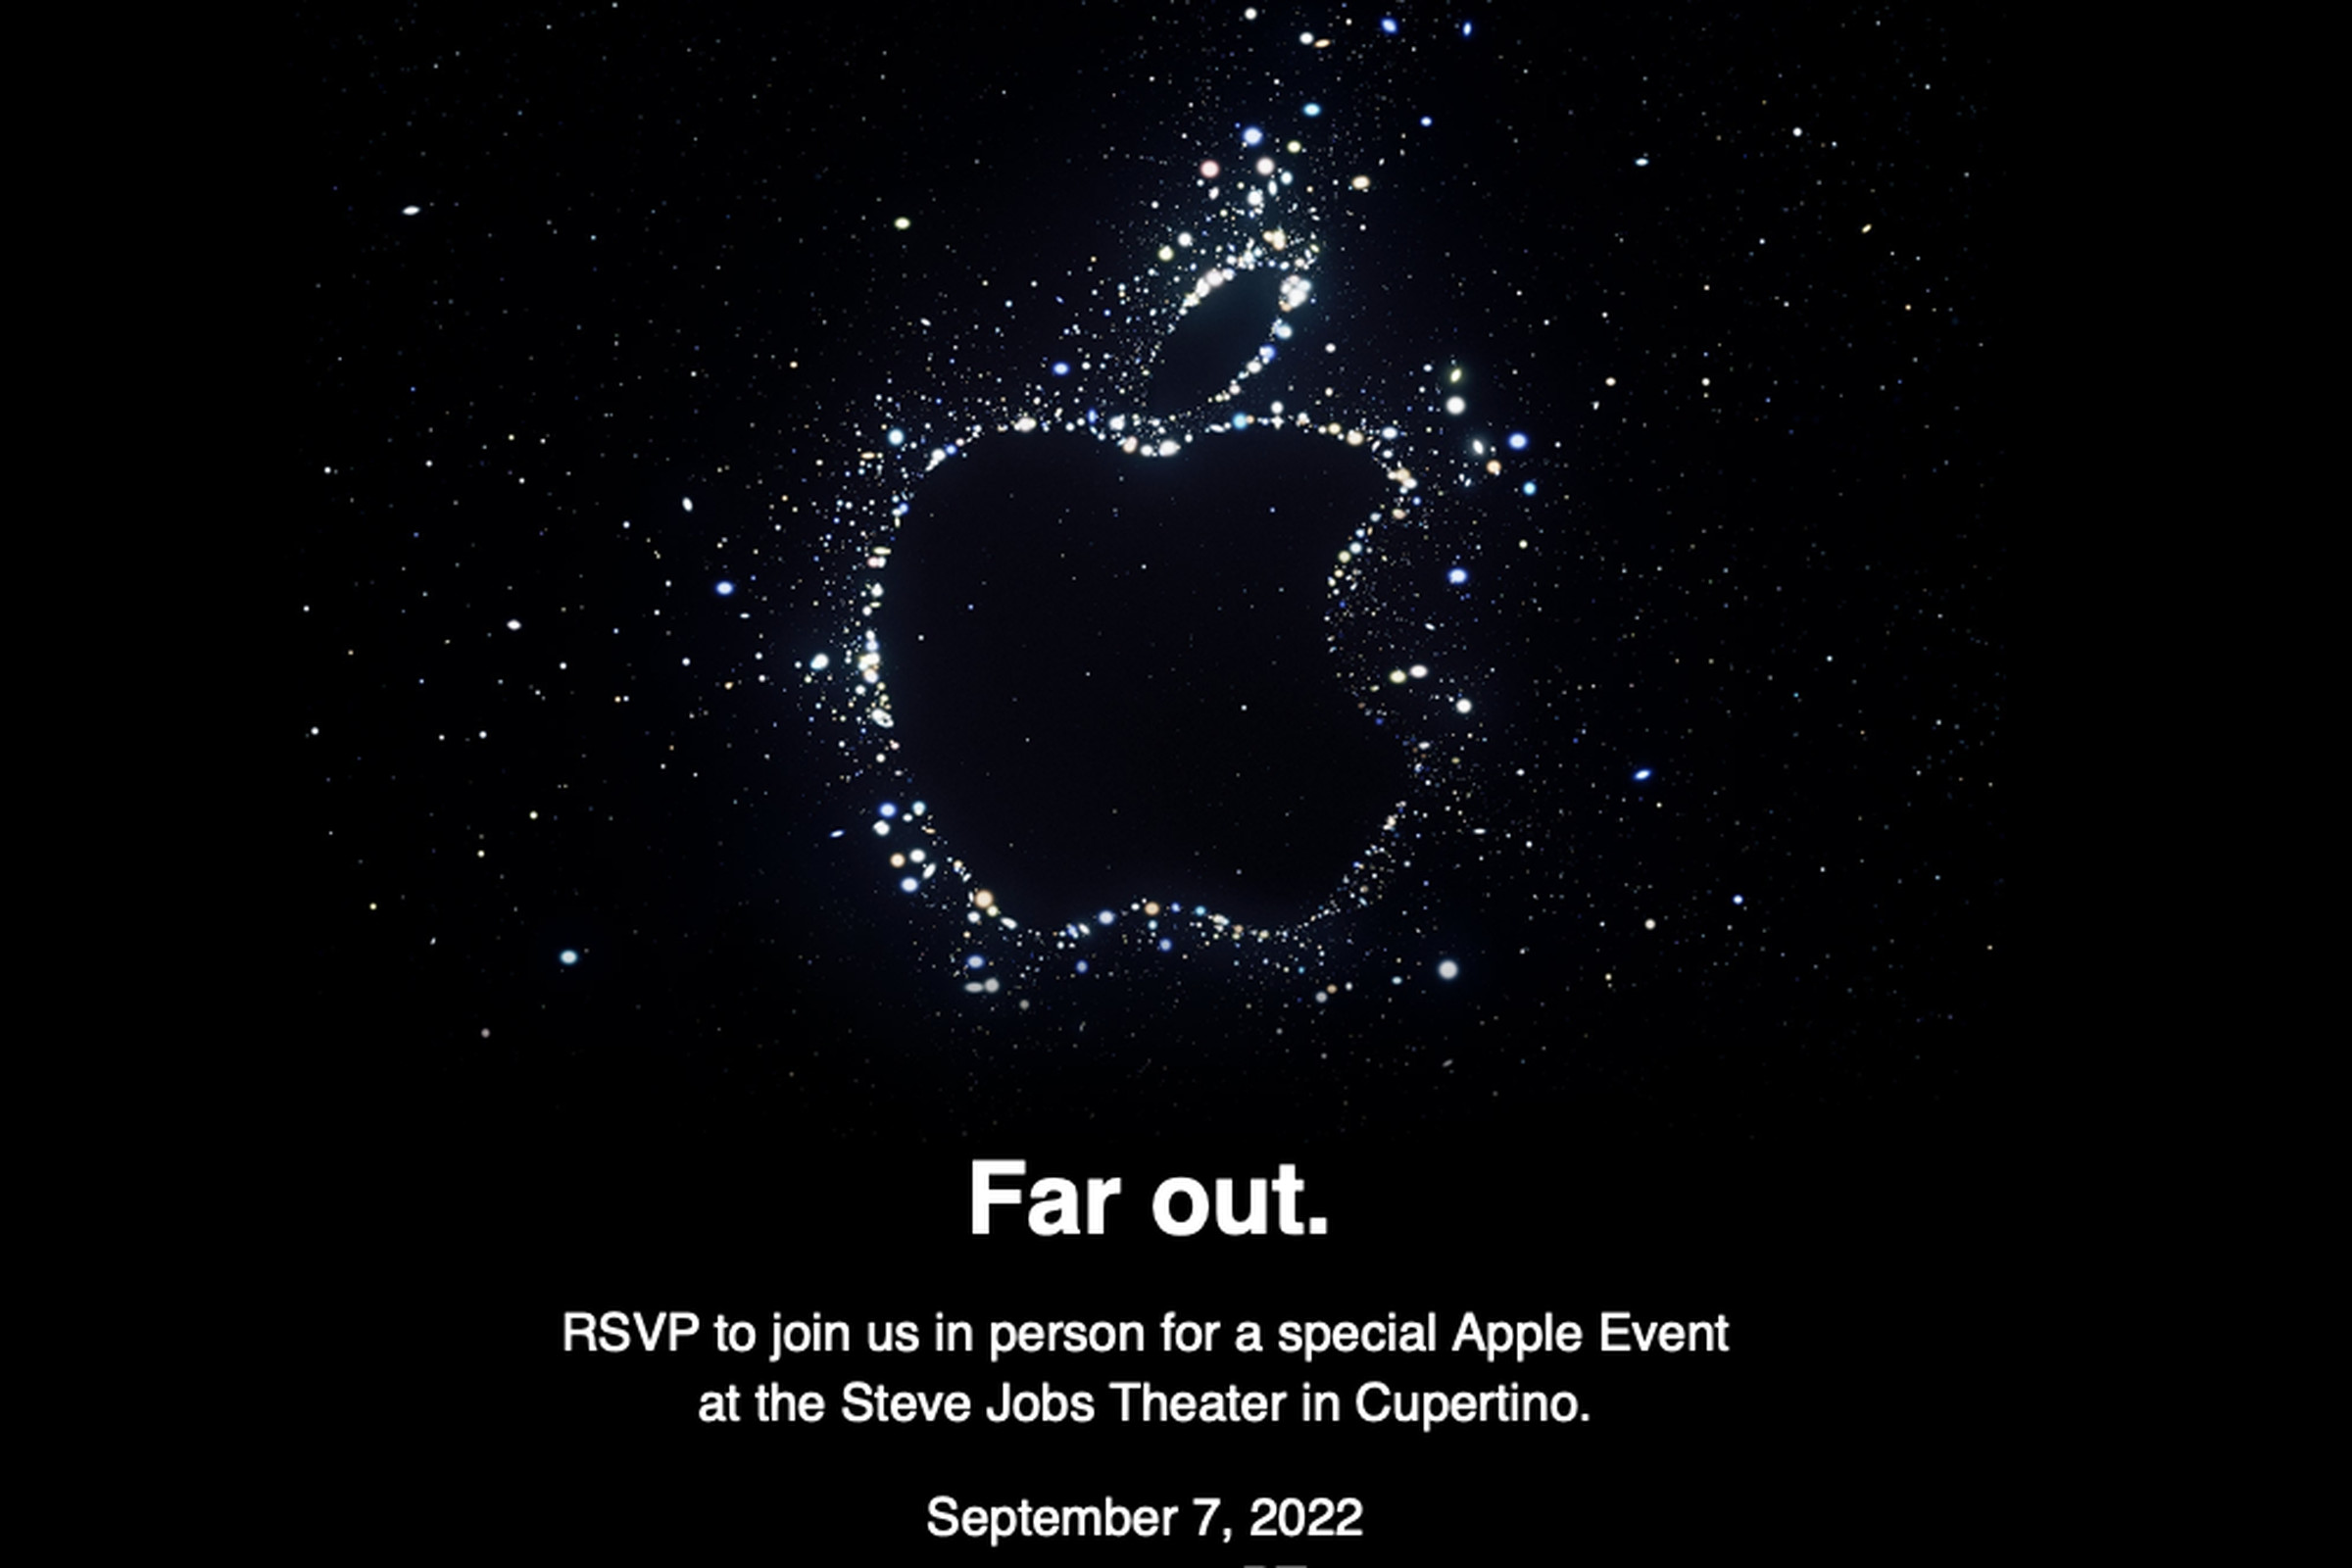 Apple’s logo outlined in glowing lights on a black background, with details about the upcoming Apple event.